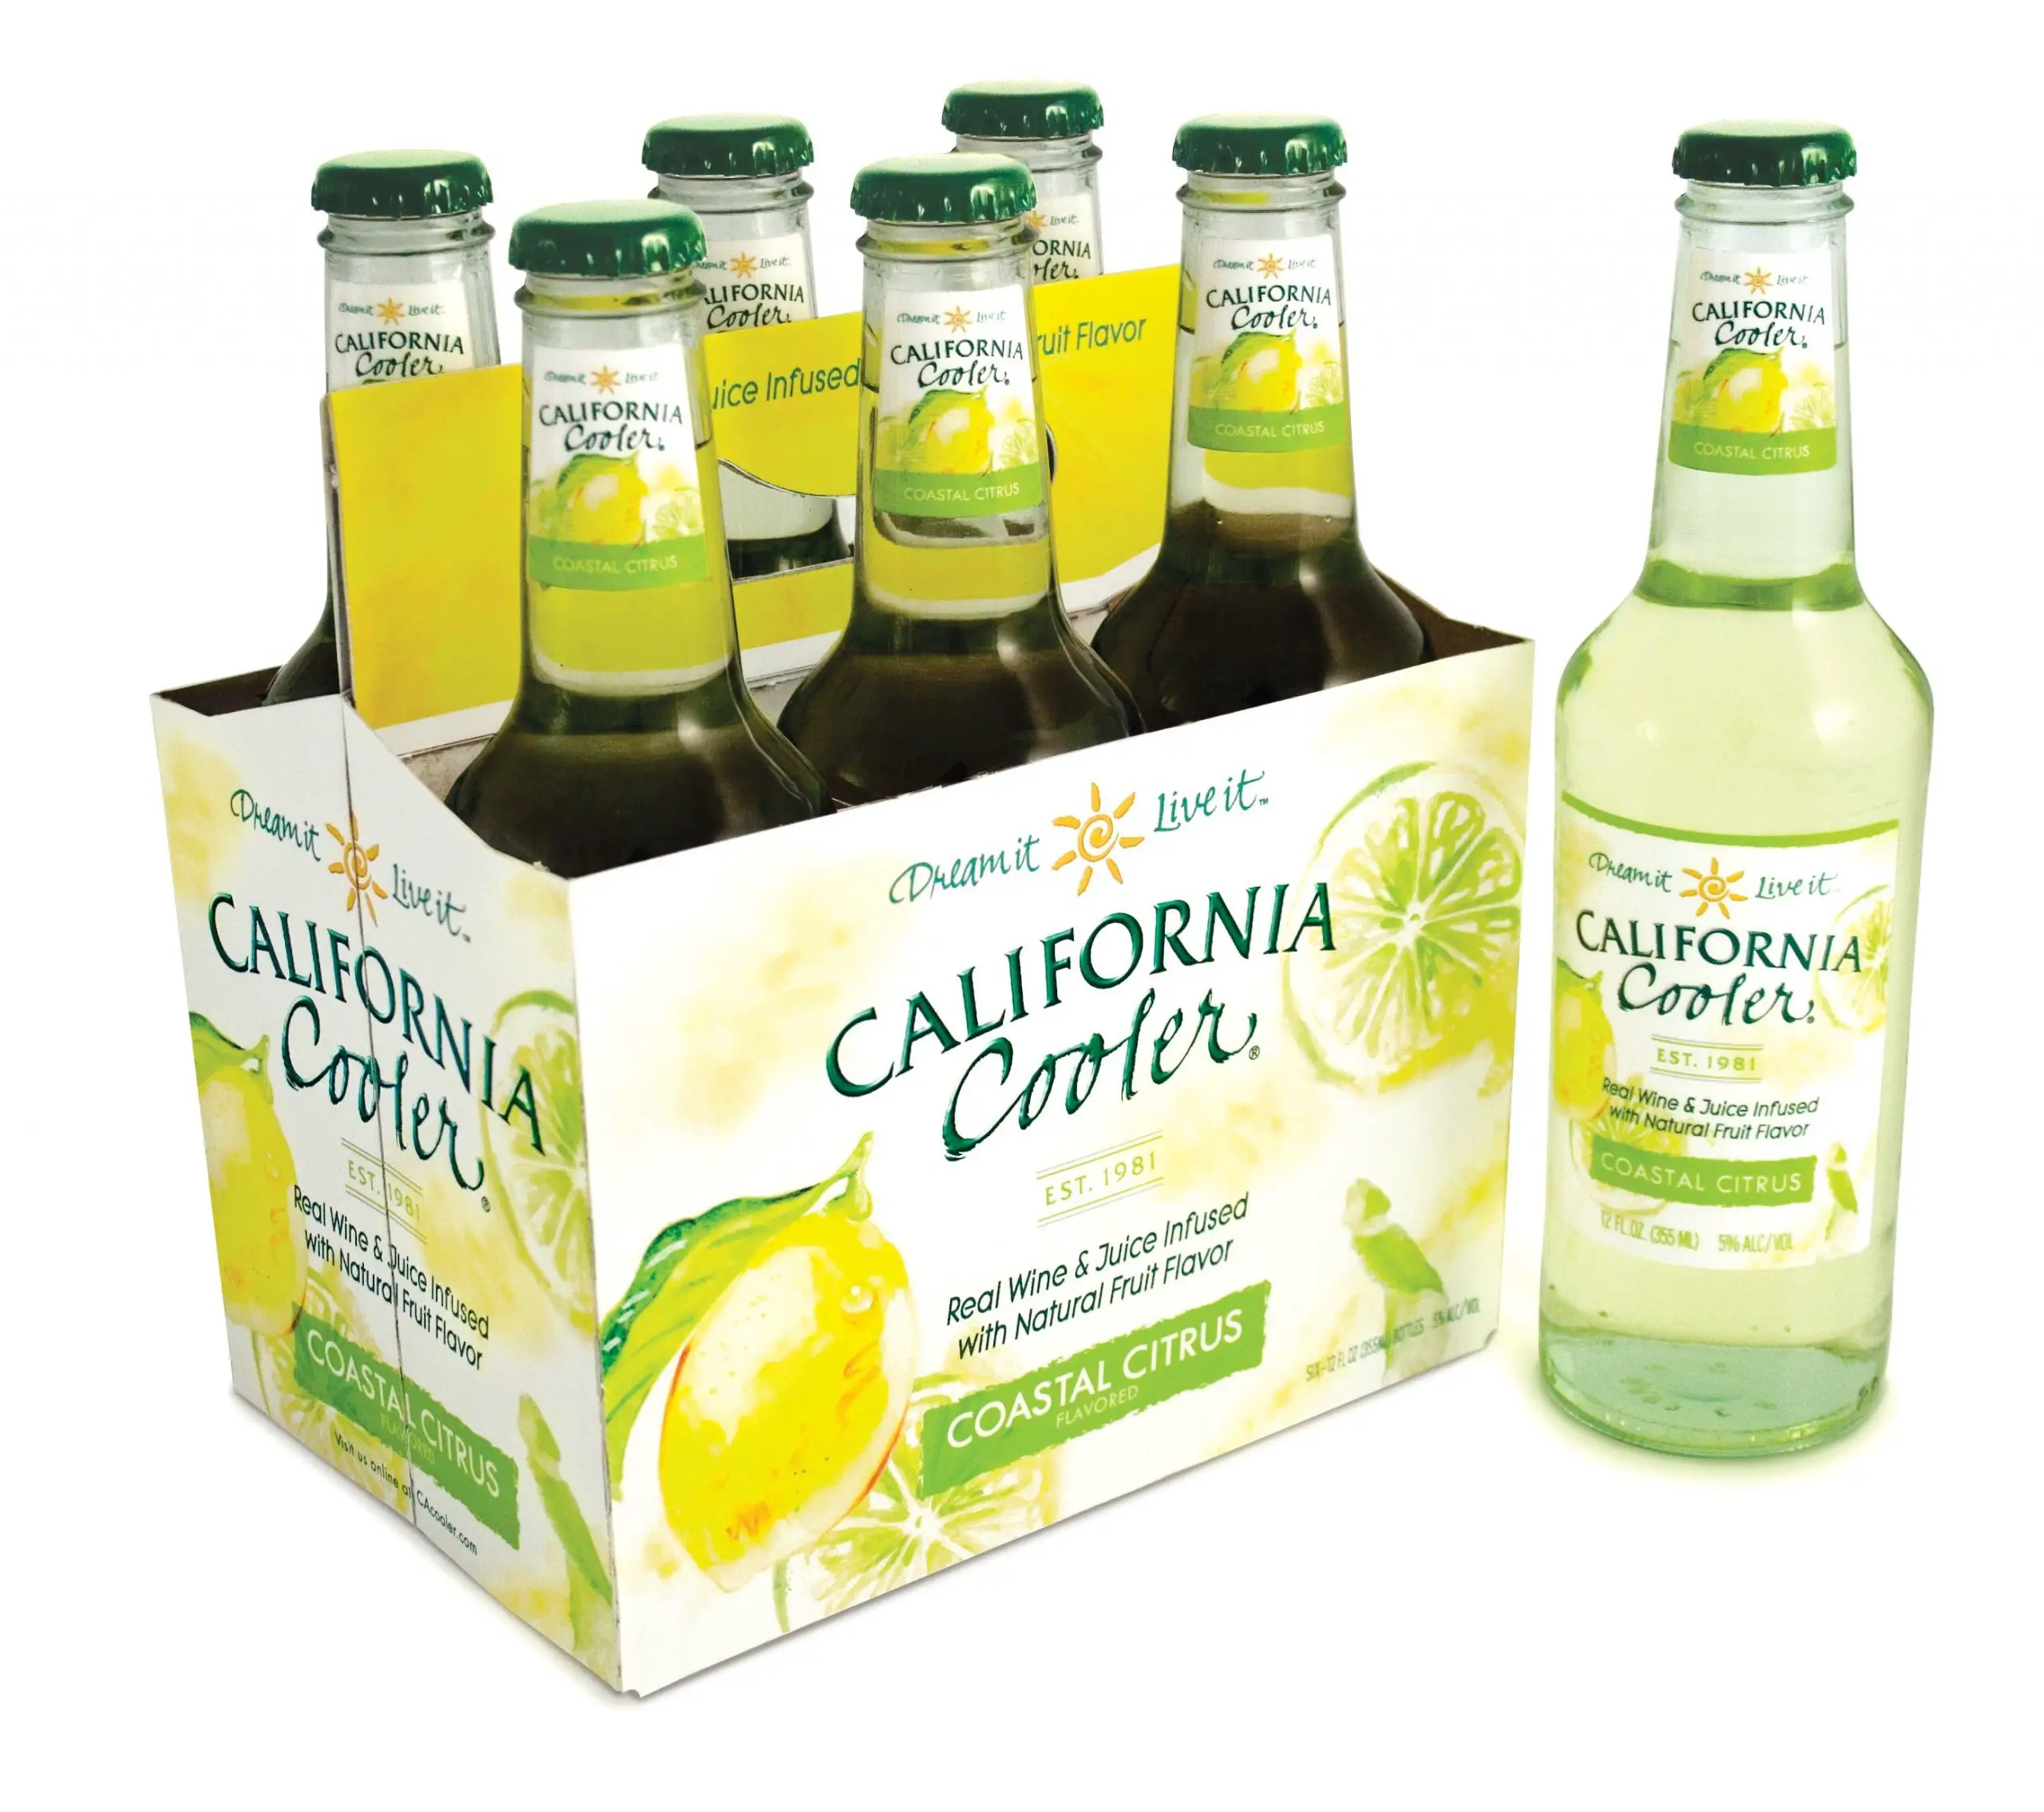 California Coolers, wine coolers